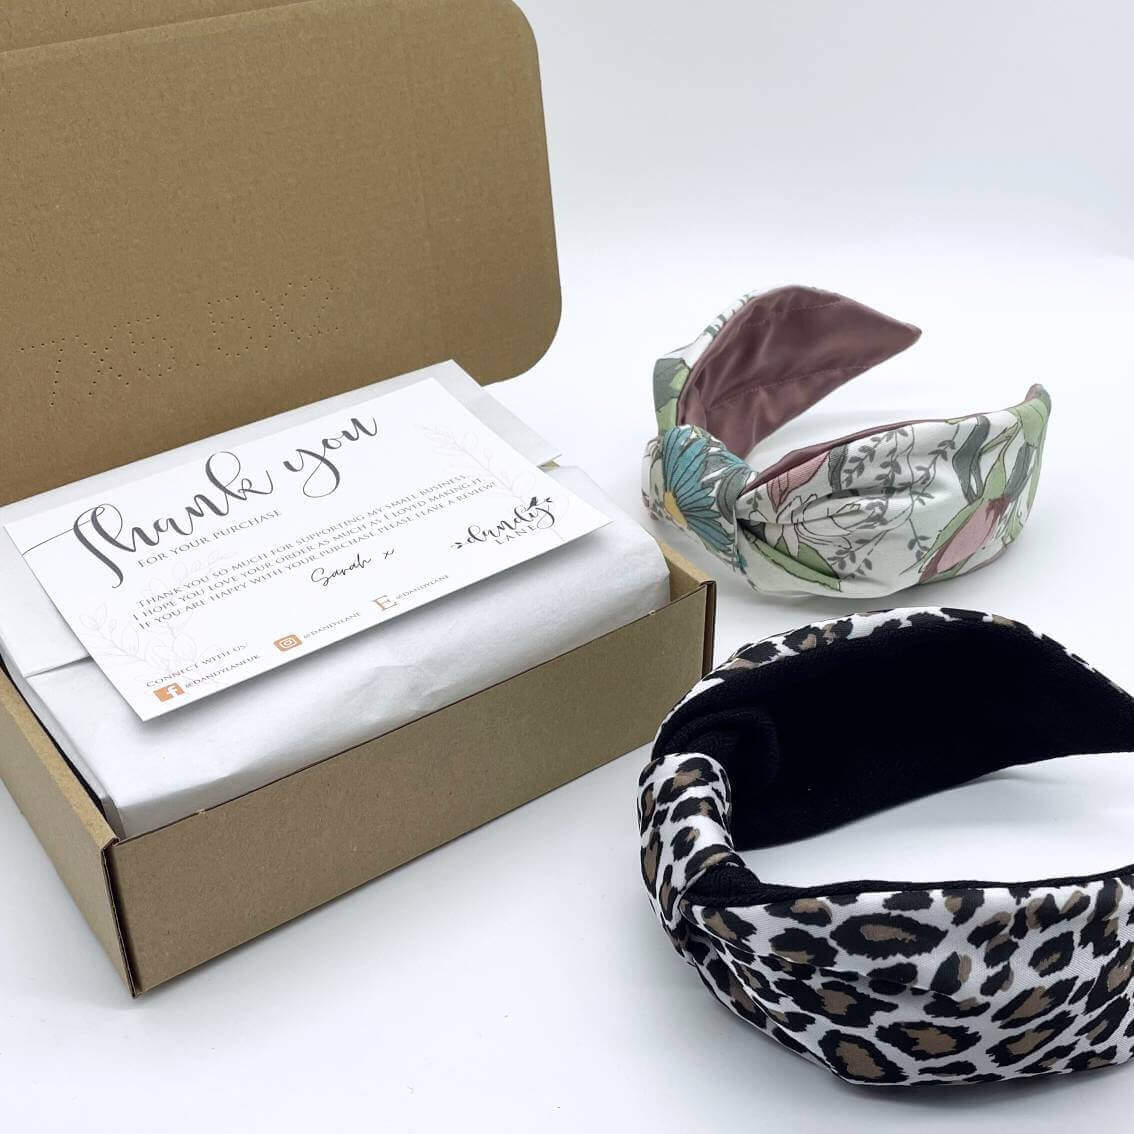 Two knotted style headbands next to a brown cardboard gift box with tissue paper and a thank you postcard inside.